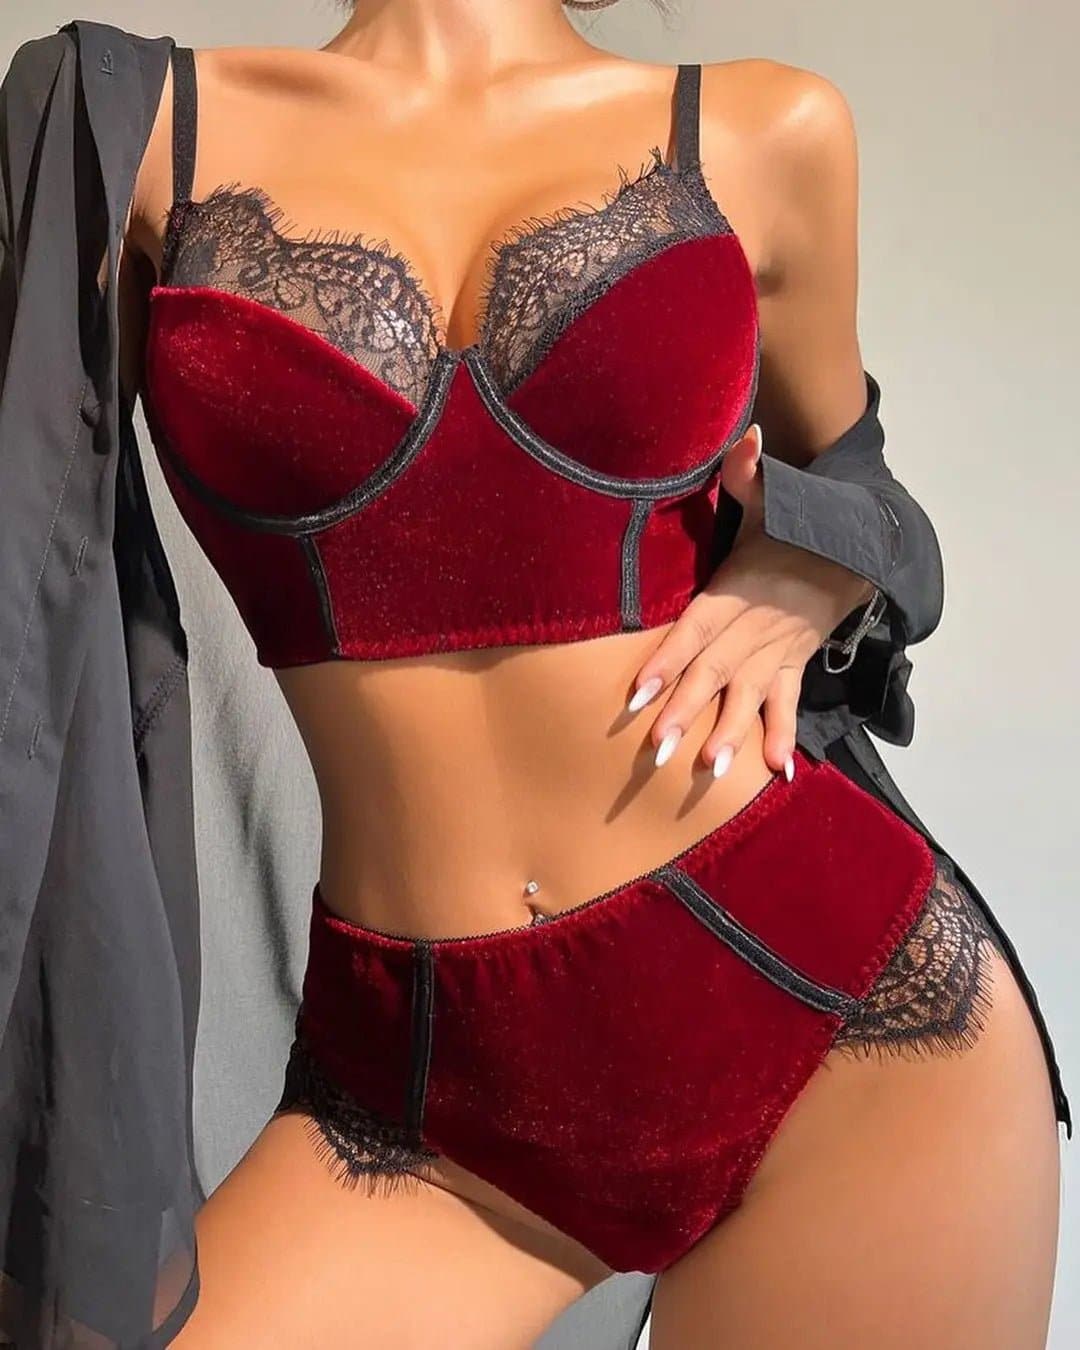 Velvet Lingerie Intimate Set with Lace - Sexy Underwire Bra & Briefs - Wandering Woman